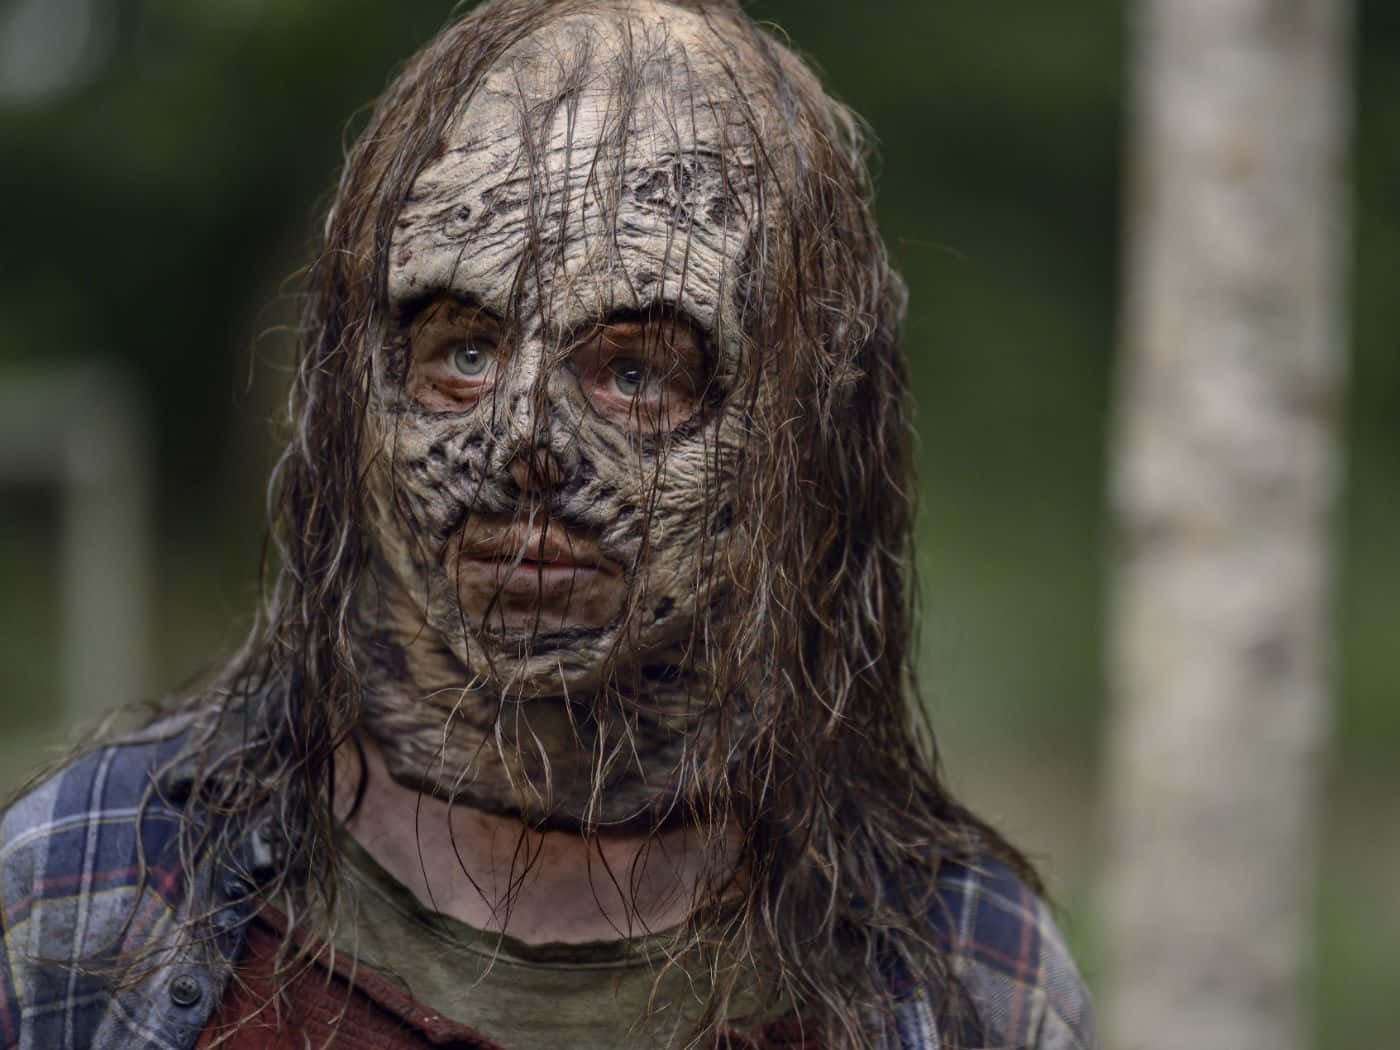 The Walking Dead Season 7 - A Man With A Mask